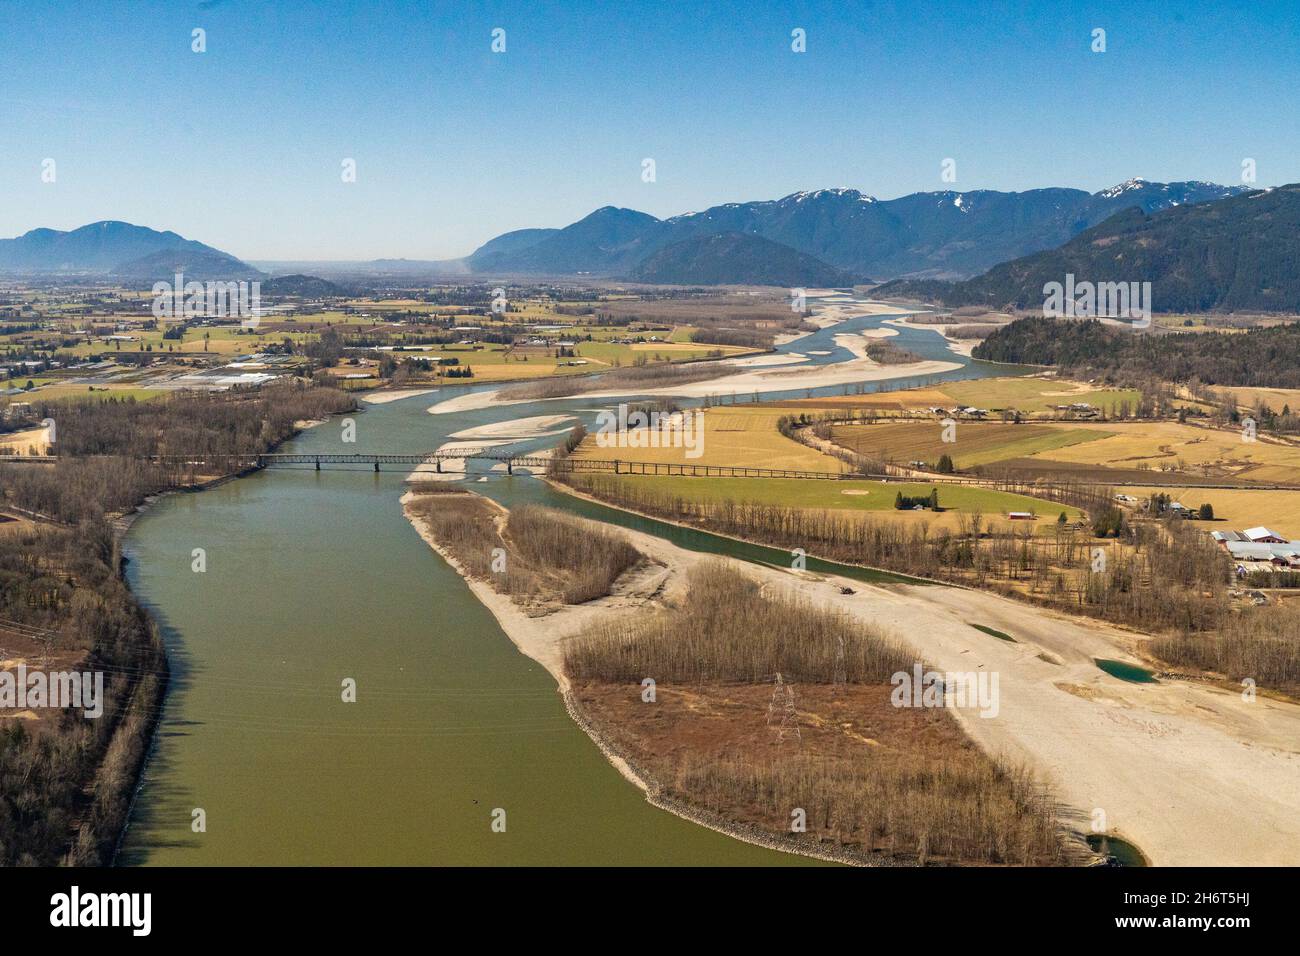 Fraser River by the village of Rosendale with the Rosendale - Agassiz highway bridge in the background. Stock Photo